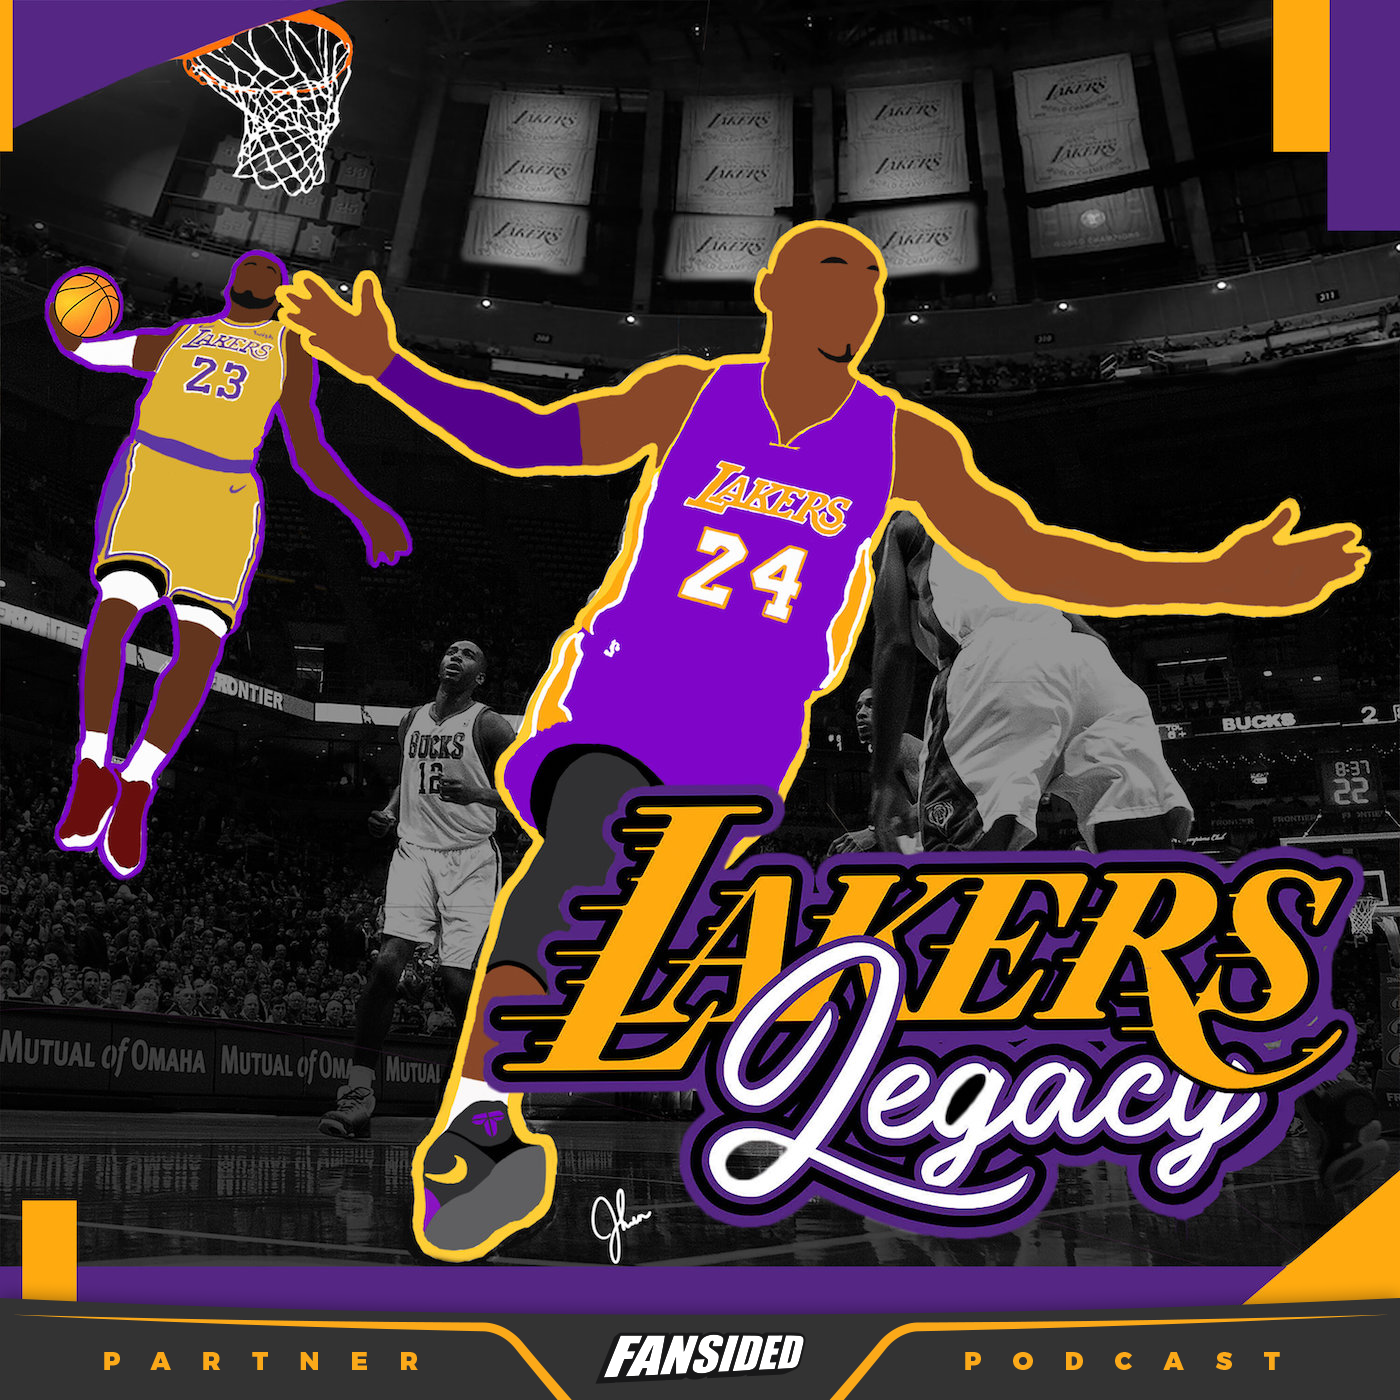 Ep. 408: The Eulogy Spot (An Airing Out Of Grievances For A Lost Season Unlike Any Other, Biggest Disappointments, AD & LeBron Sending A Final Message, Confidence In Pelinka's Ability to Course Correct)